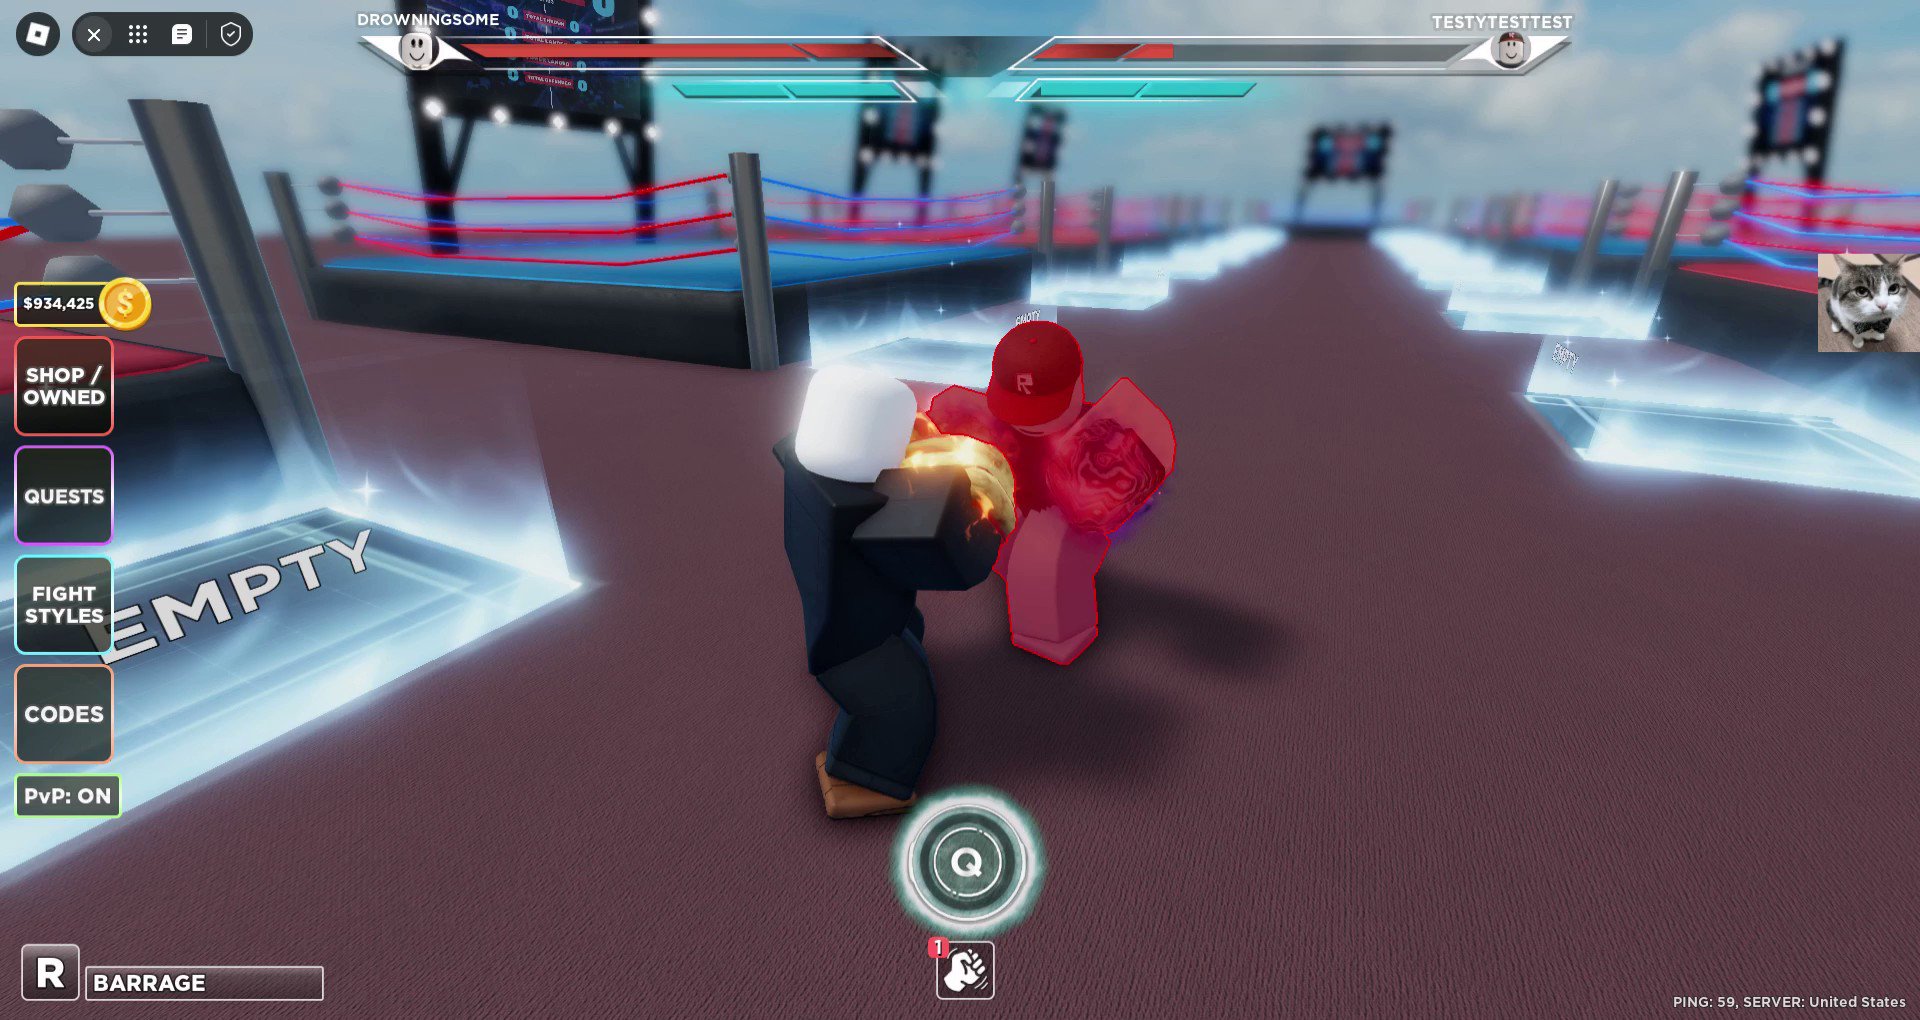 EMOTES] 🥊untitled boxing game🥊 - Roblox